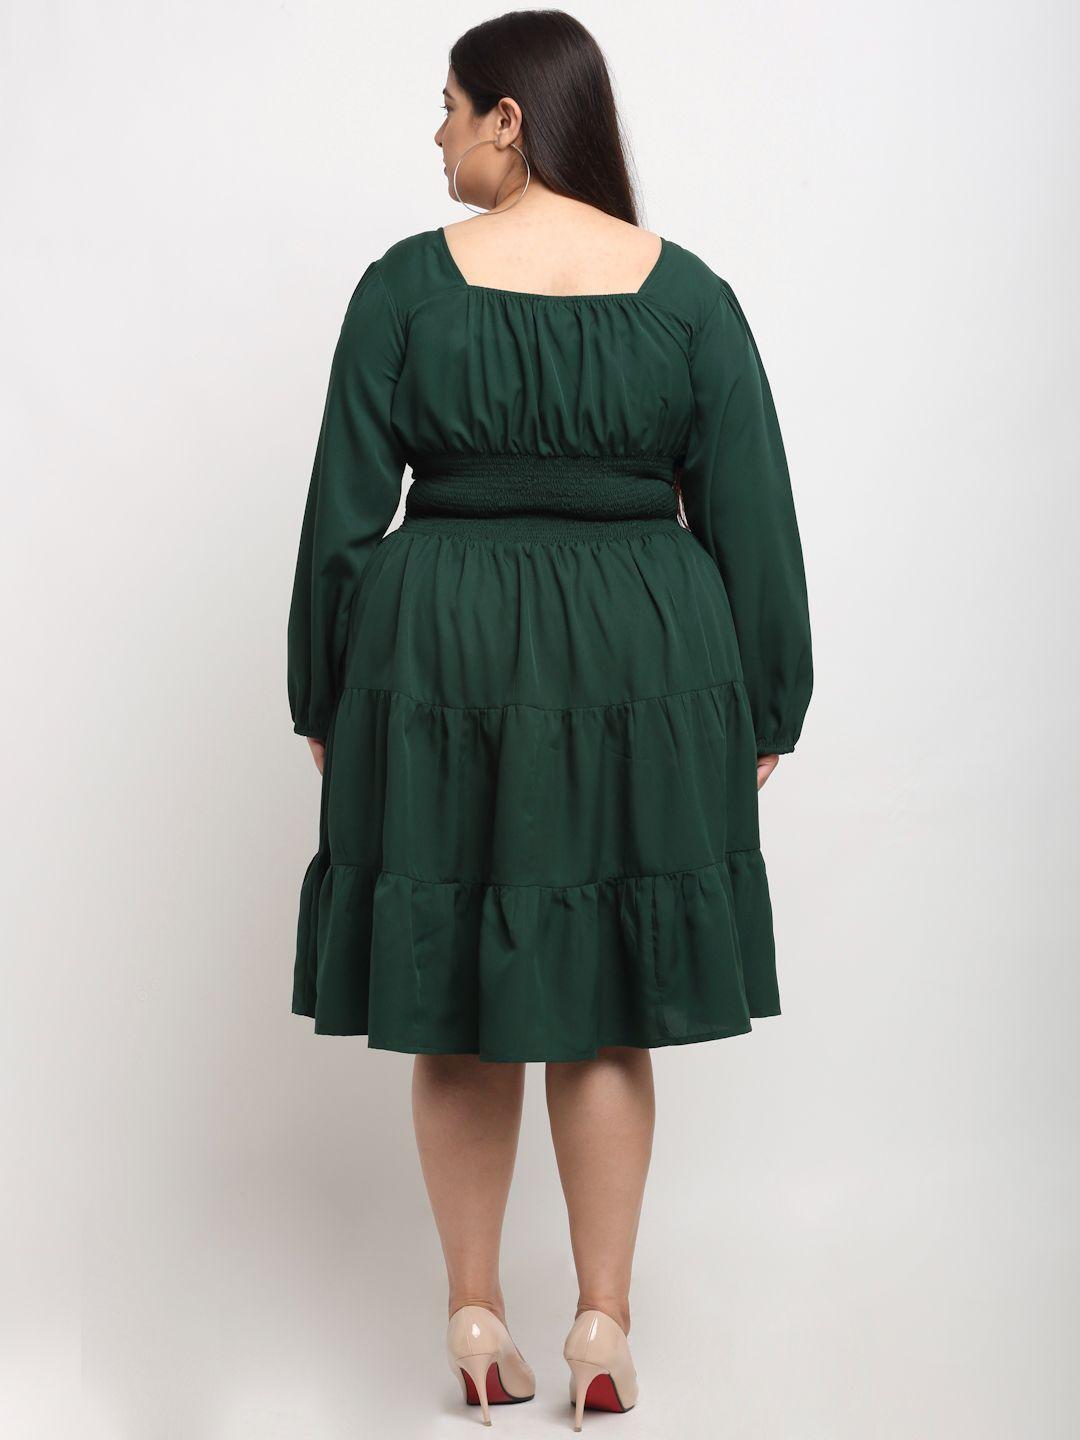 Women's Plus Size Crepe Solid Puff Sleeves Short Dress